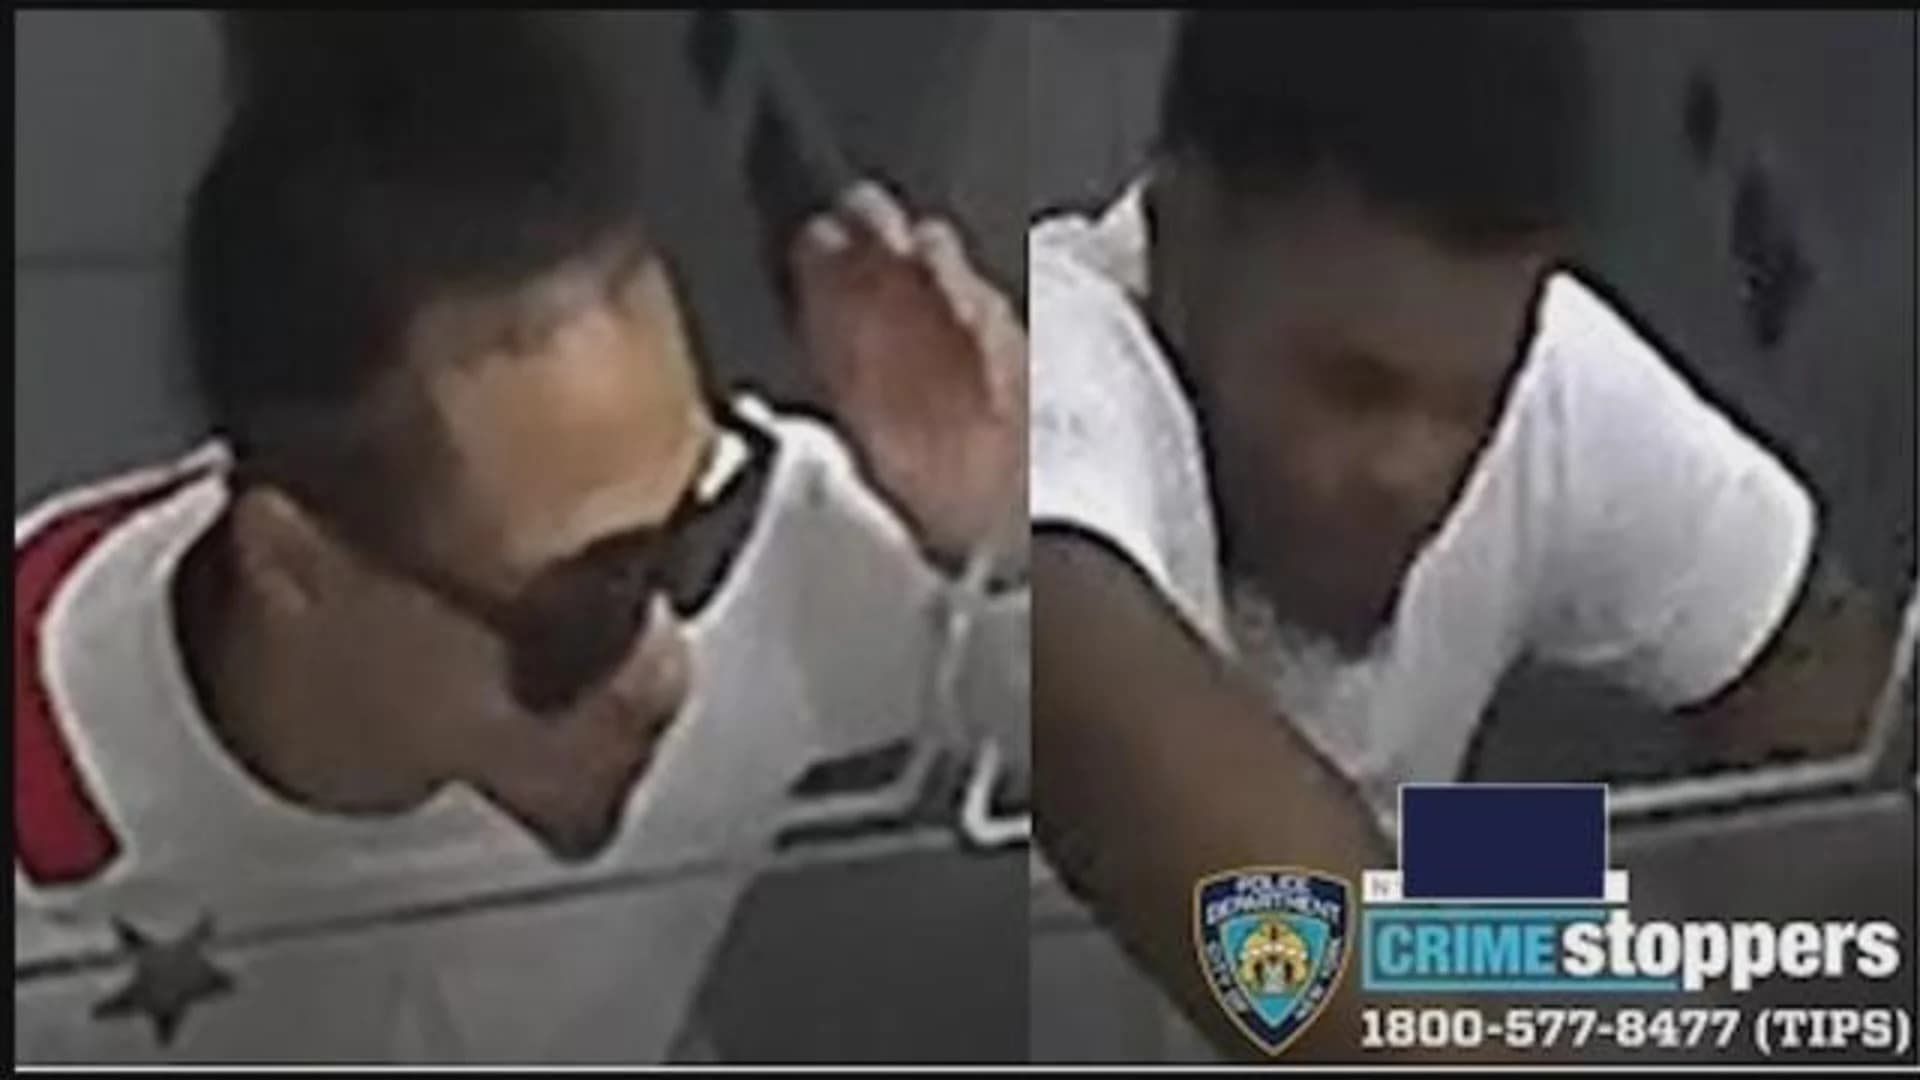 Police: 2 men attempted to rob Morrisania fried chicken restaurant